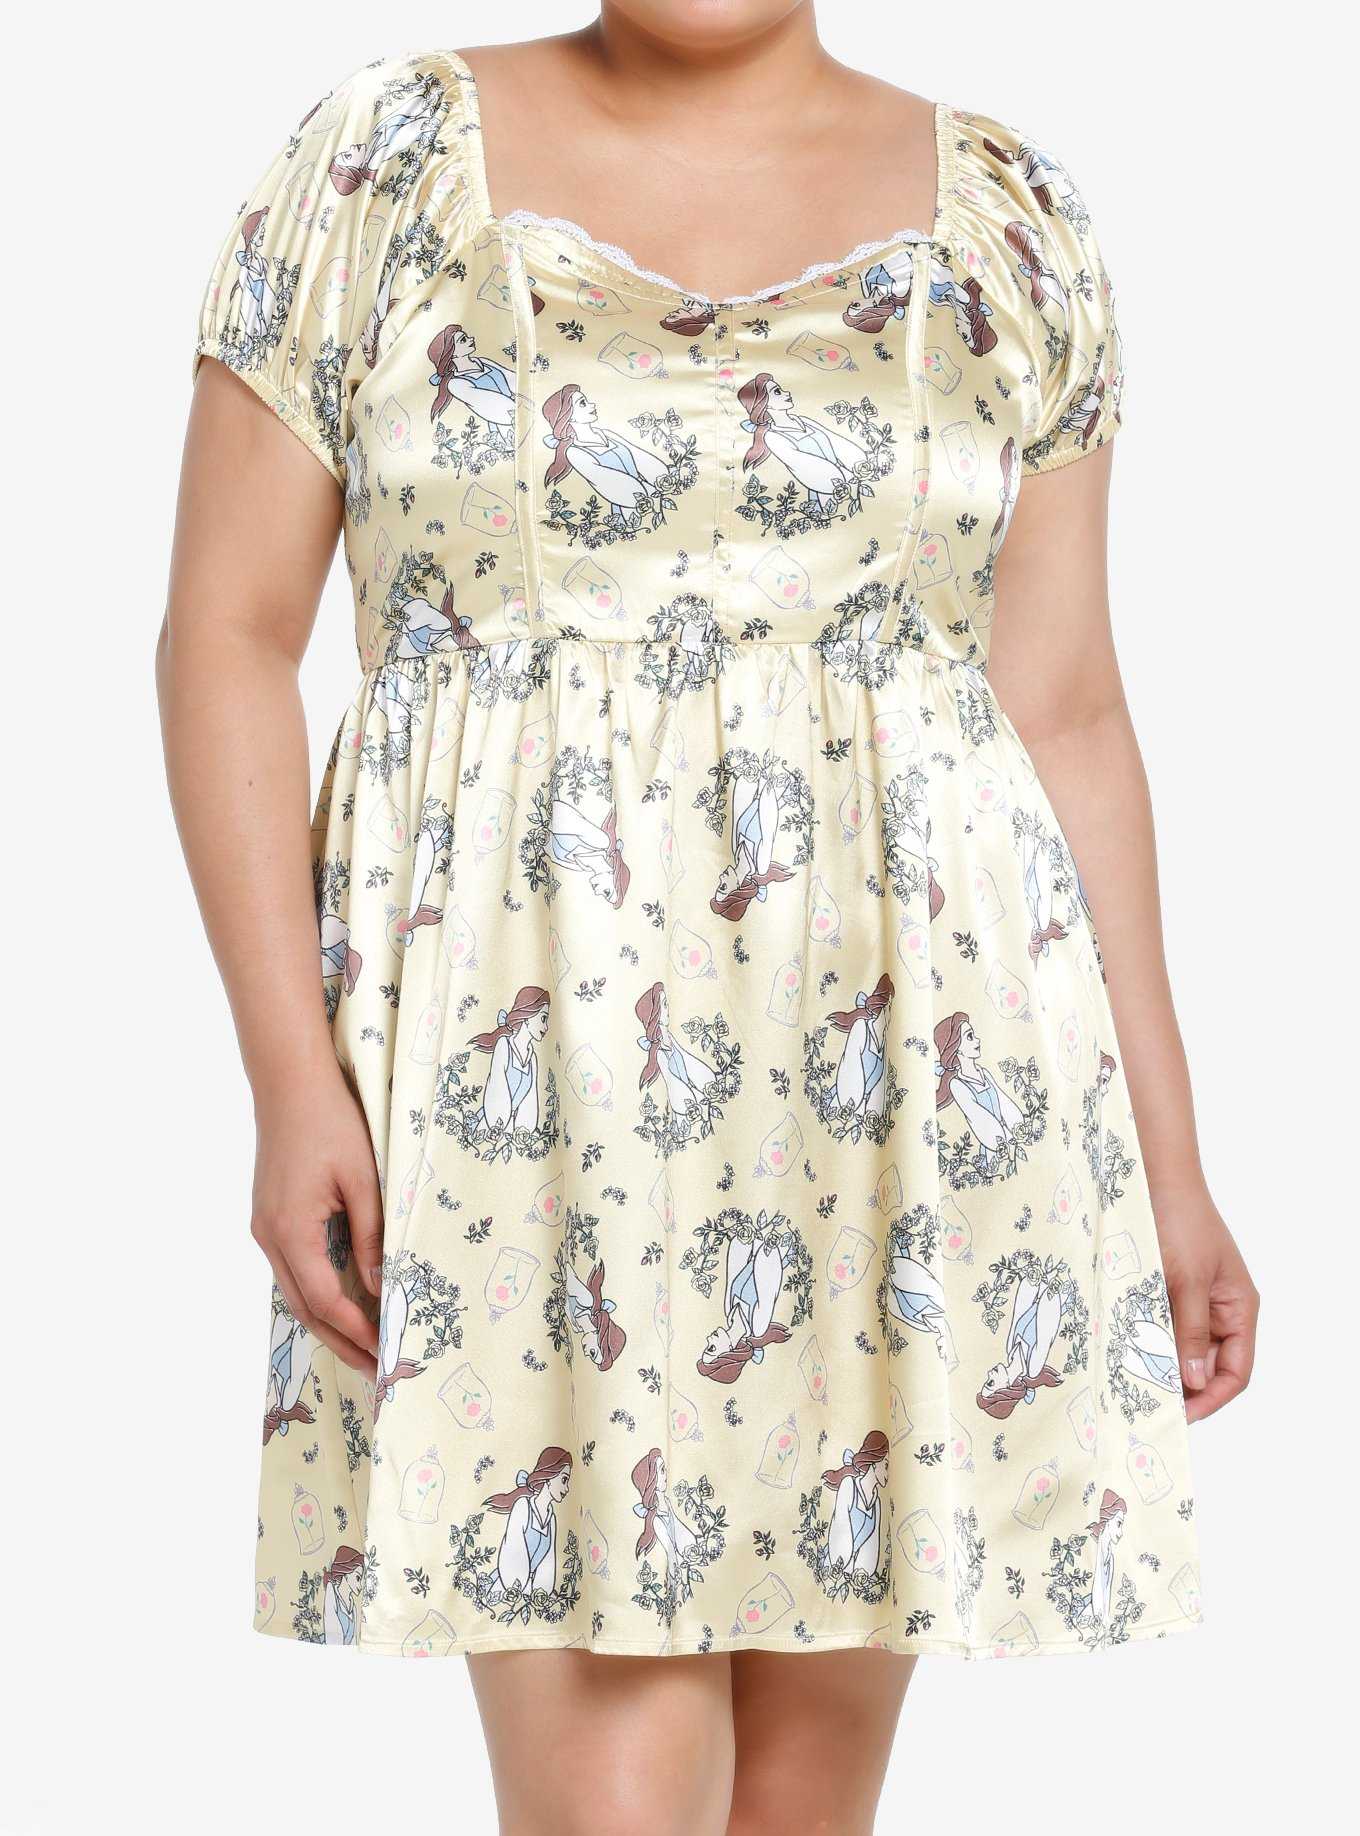 Disney Beauty And The Beast Belle Satin Sweetheart Dress Plus Size, , hi-res